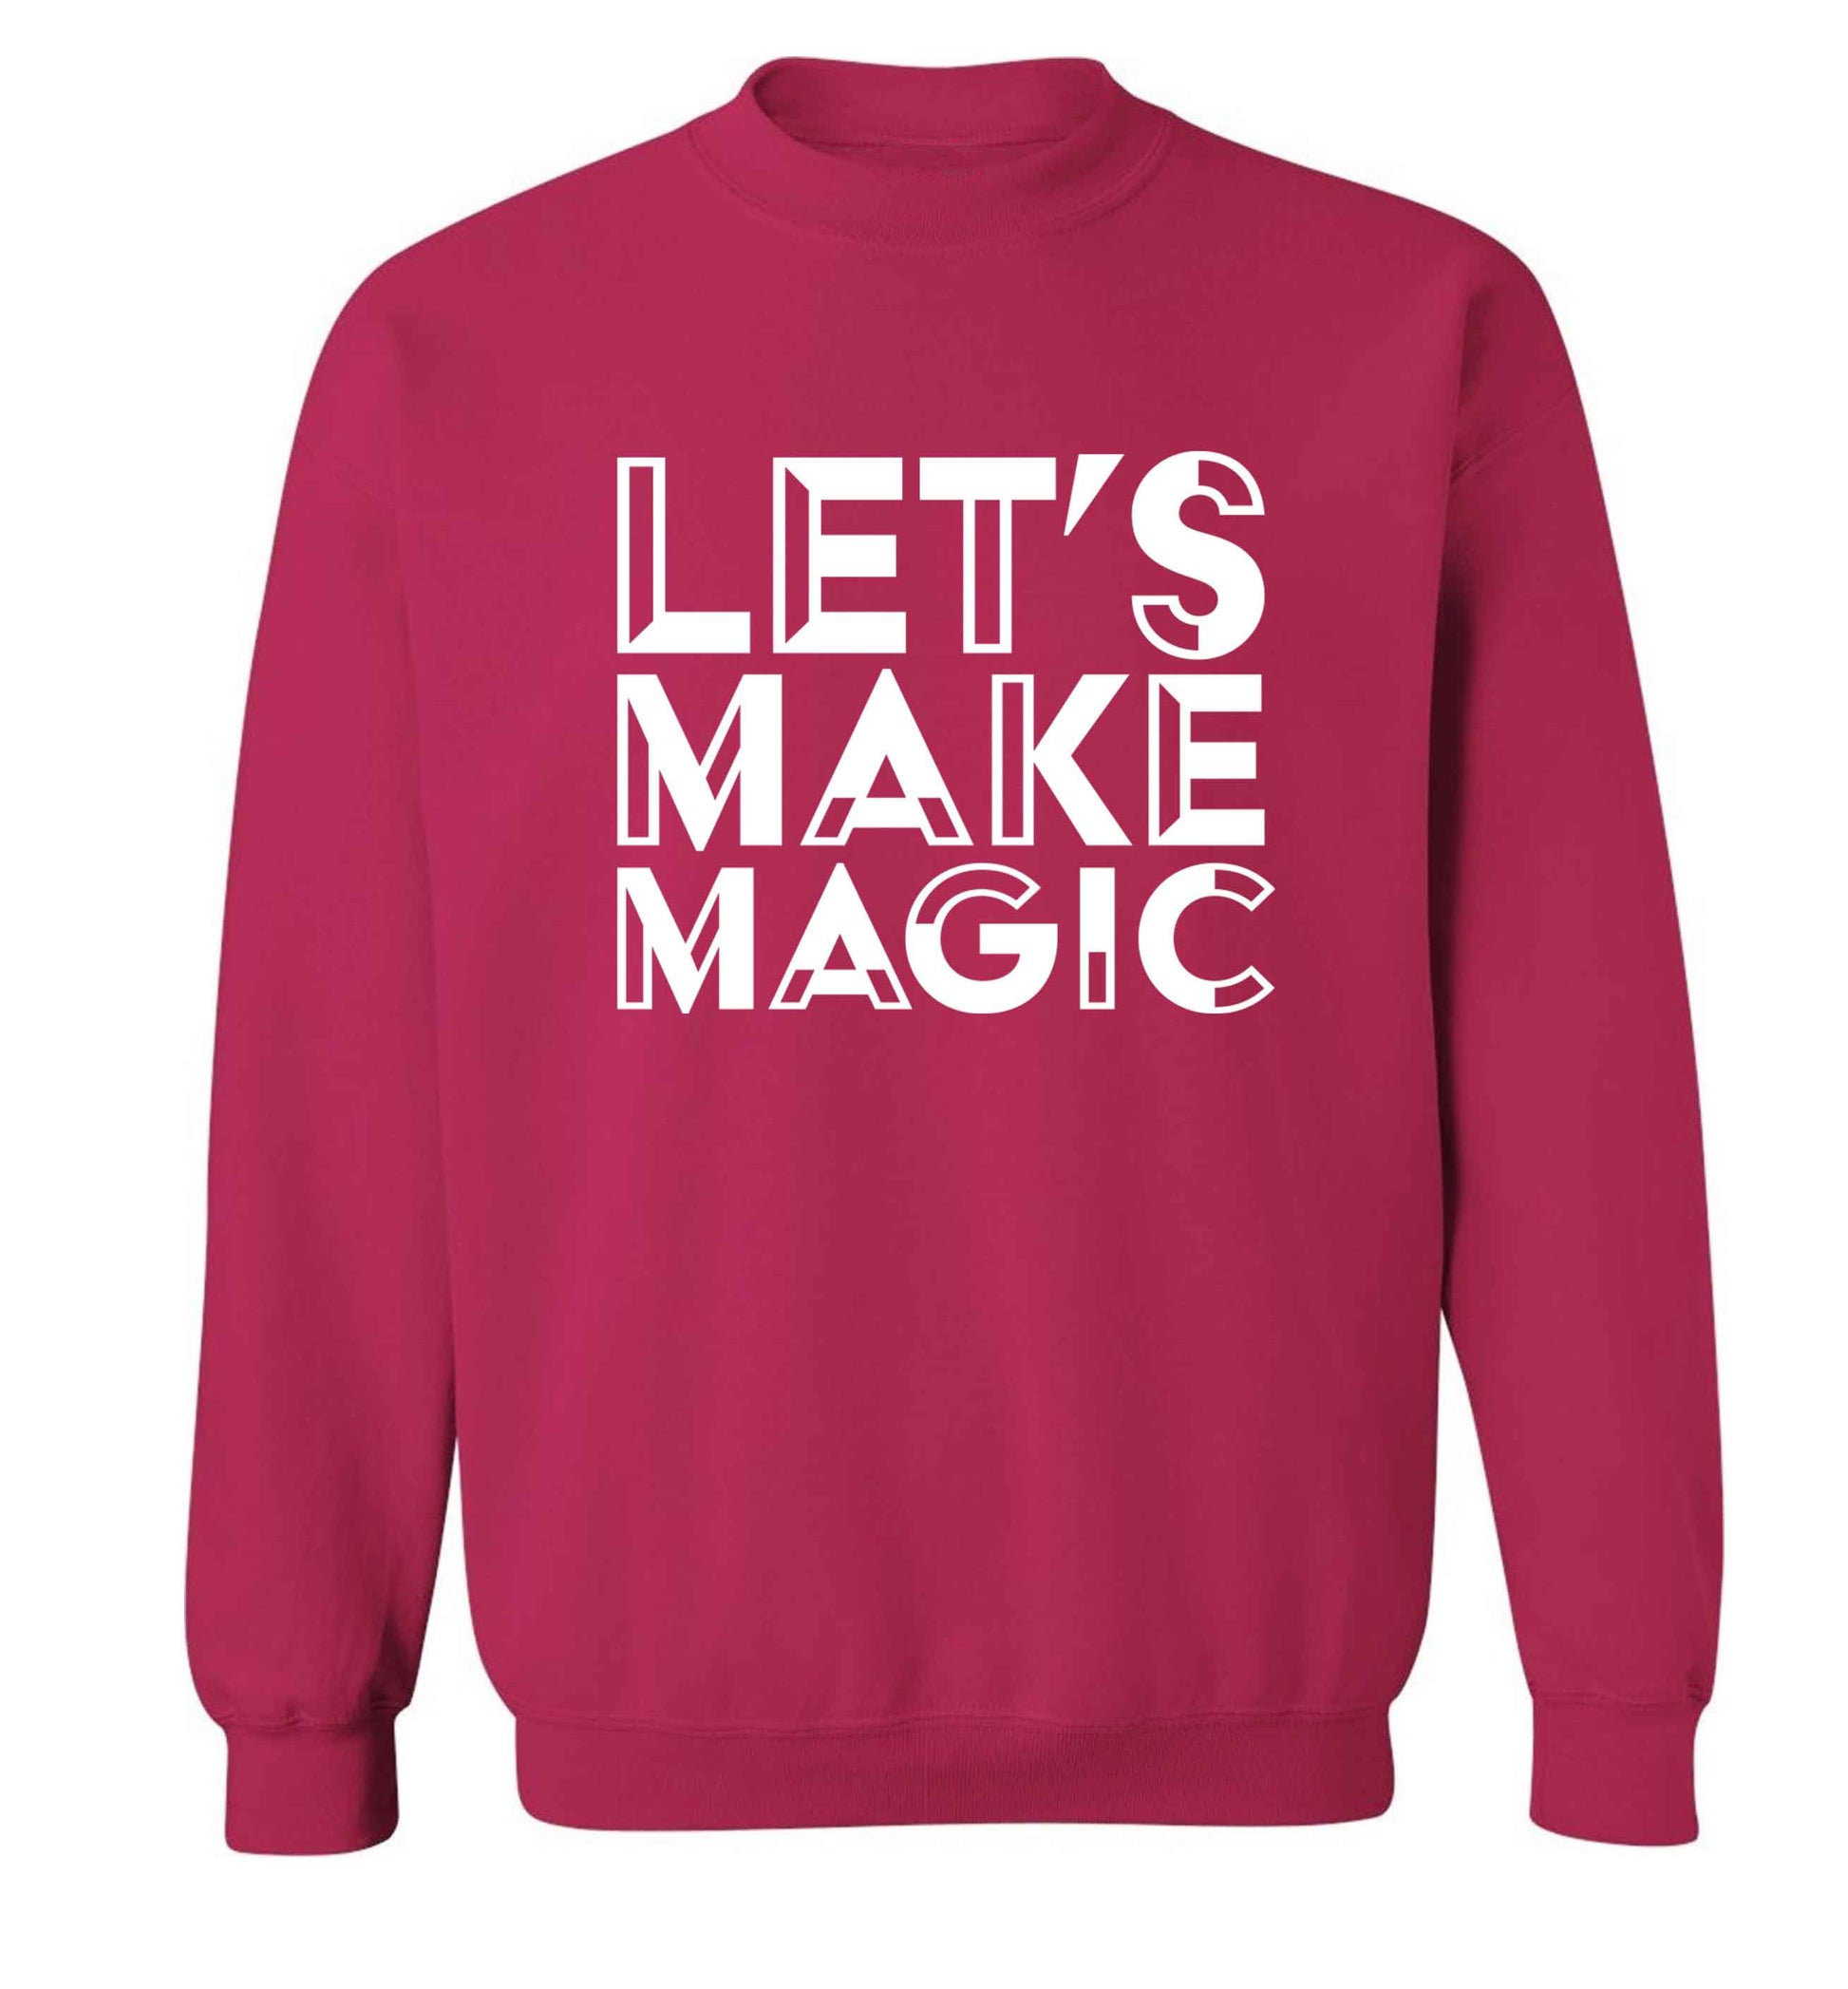 Let's make magic adult's unisex pink sweater 2XL